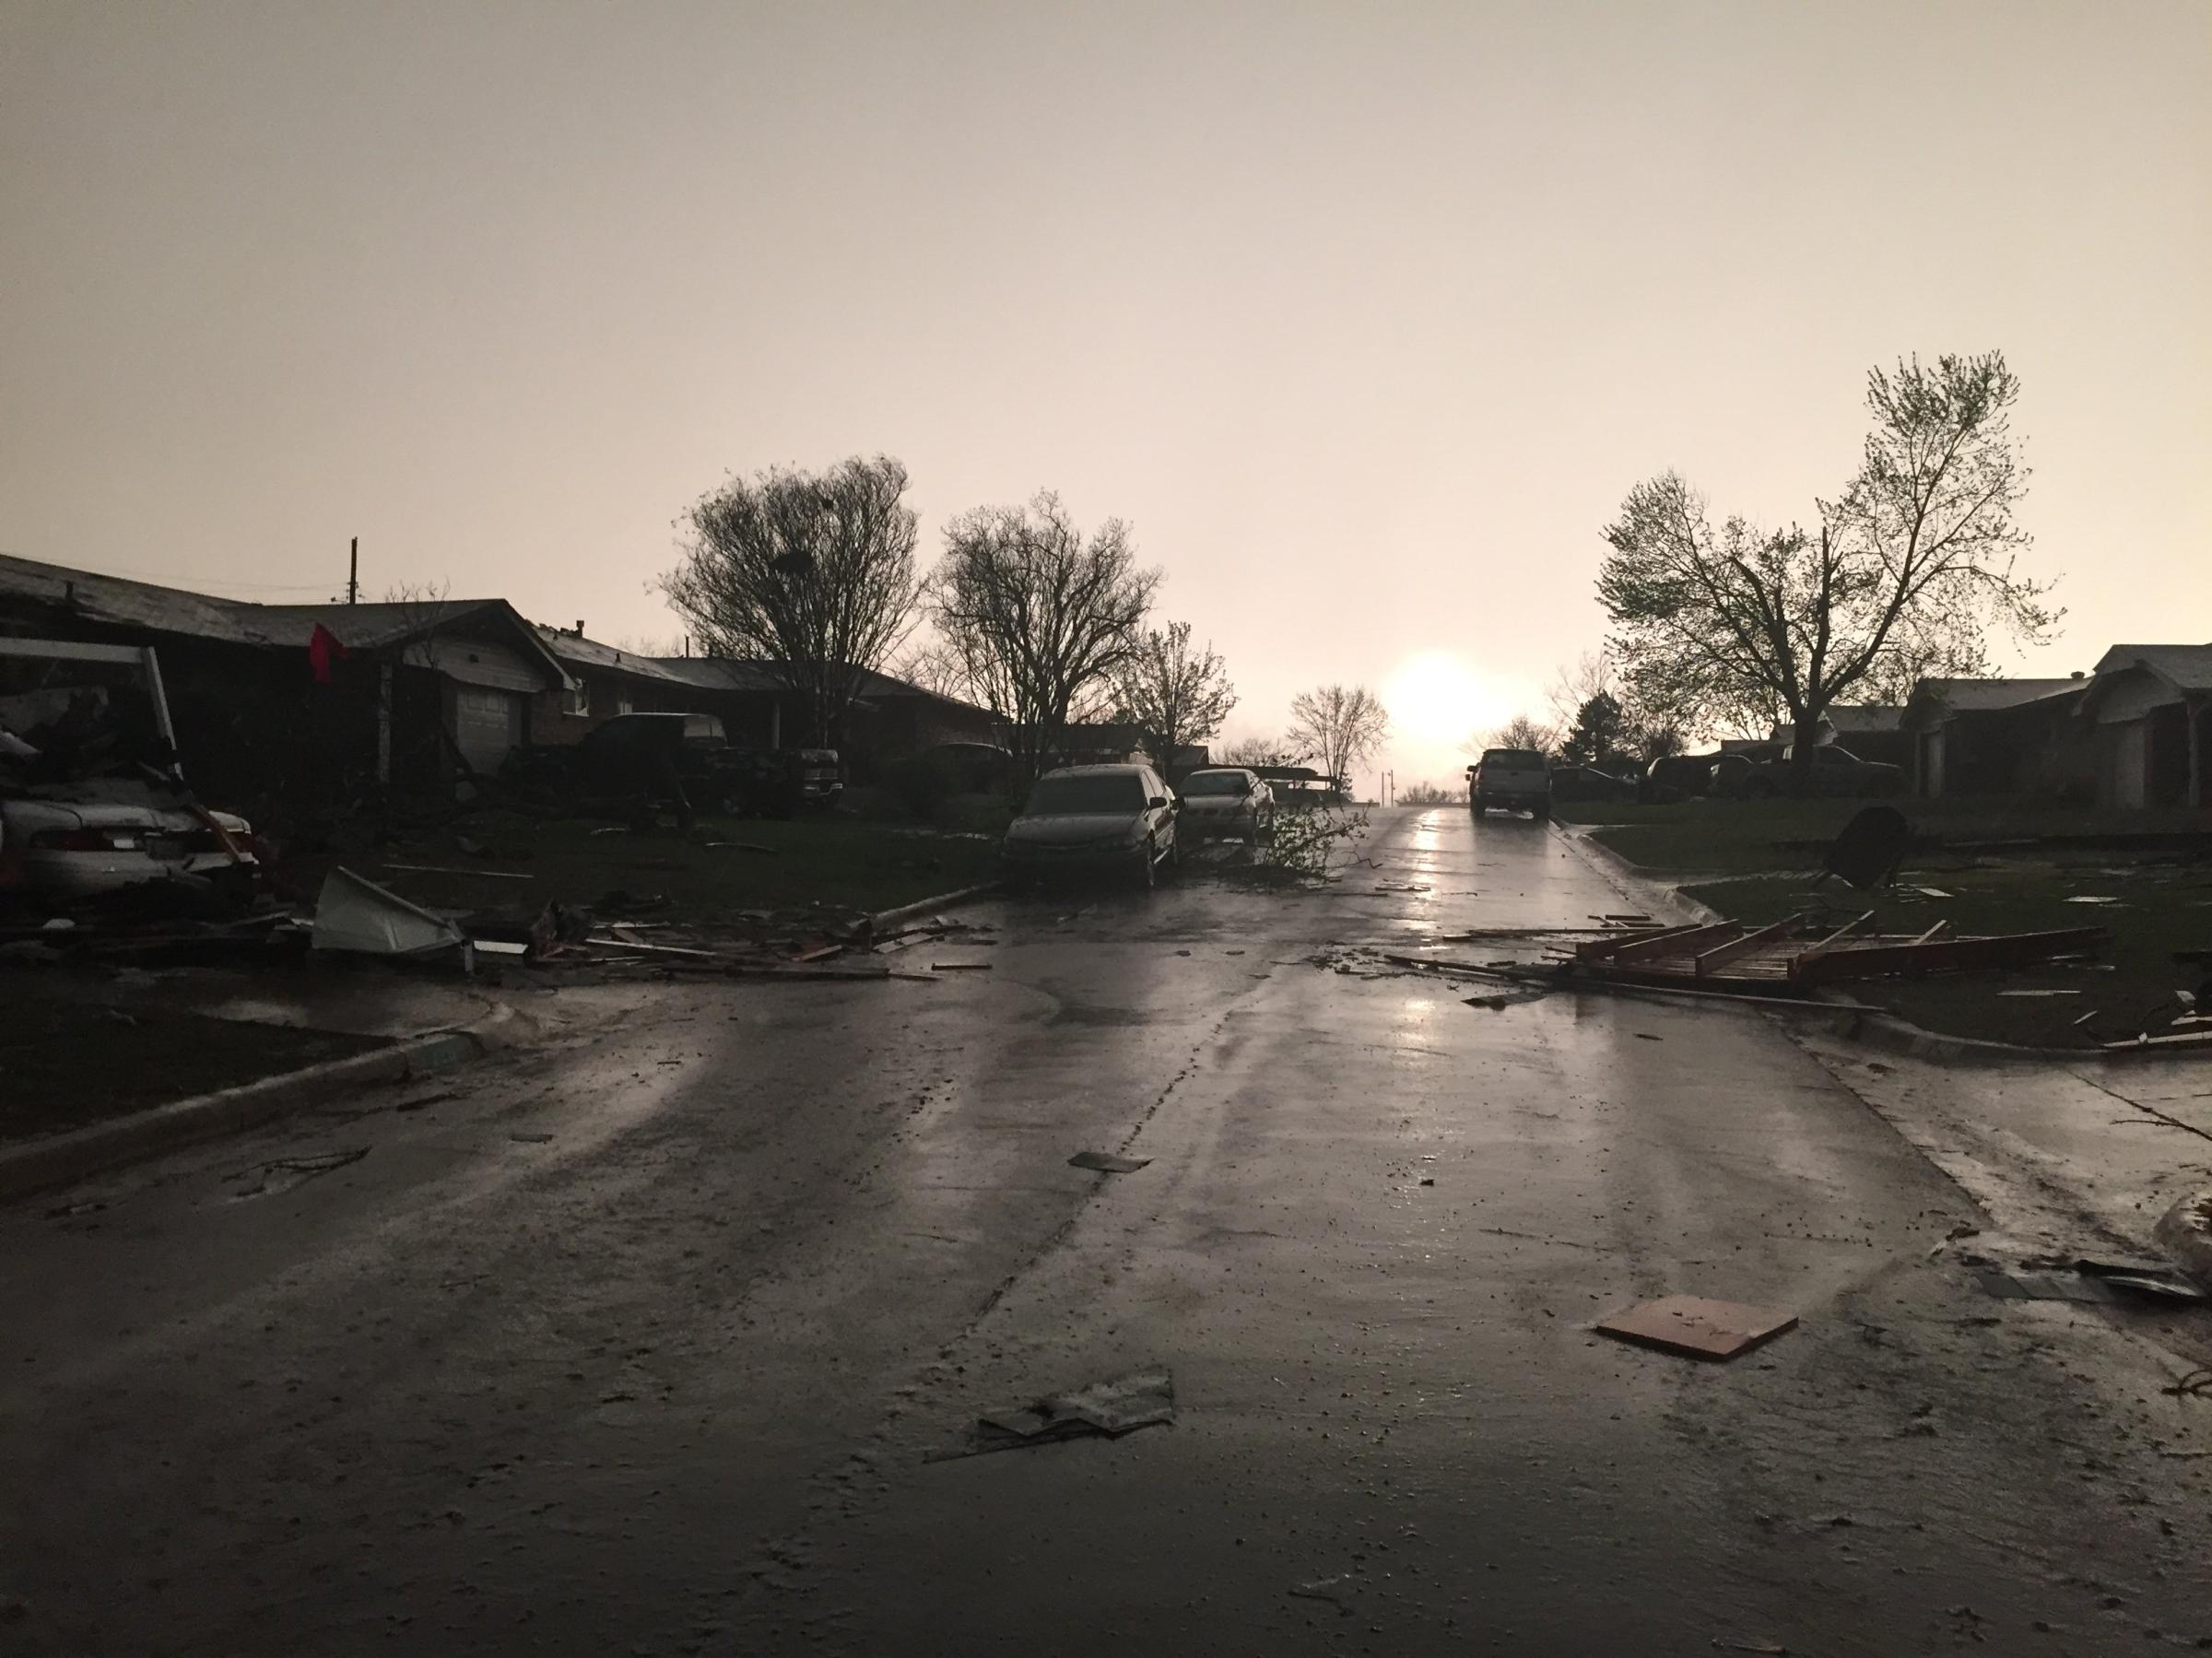 Debris and downed trees litter the streets after a tornado ripped through Moore, Okla. on March 25, 2015.